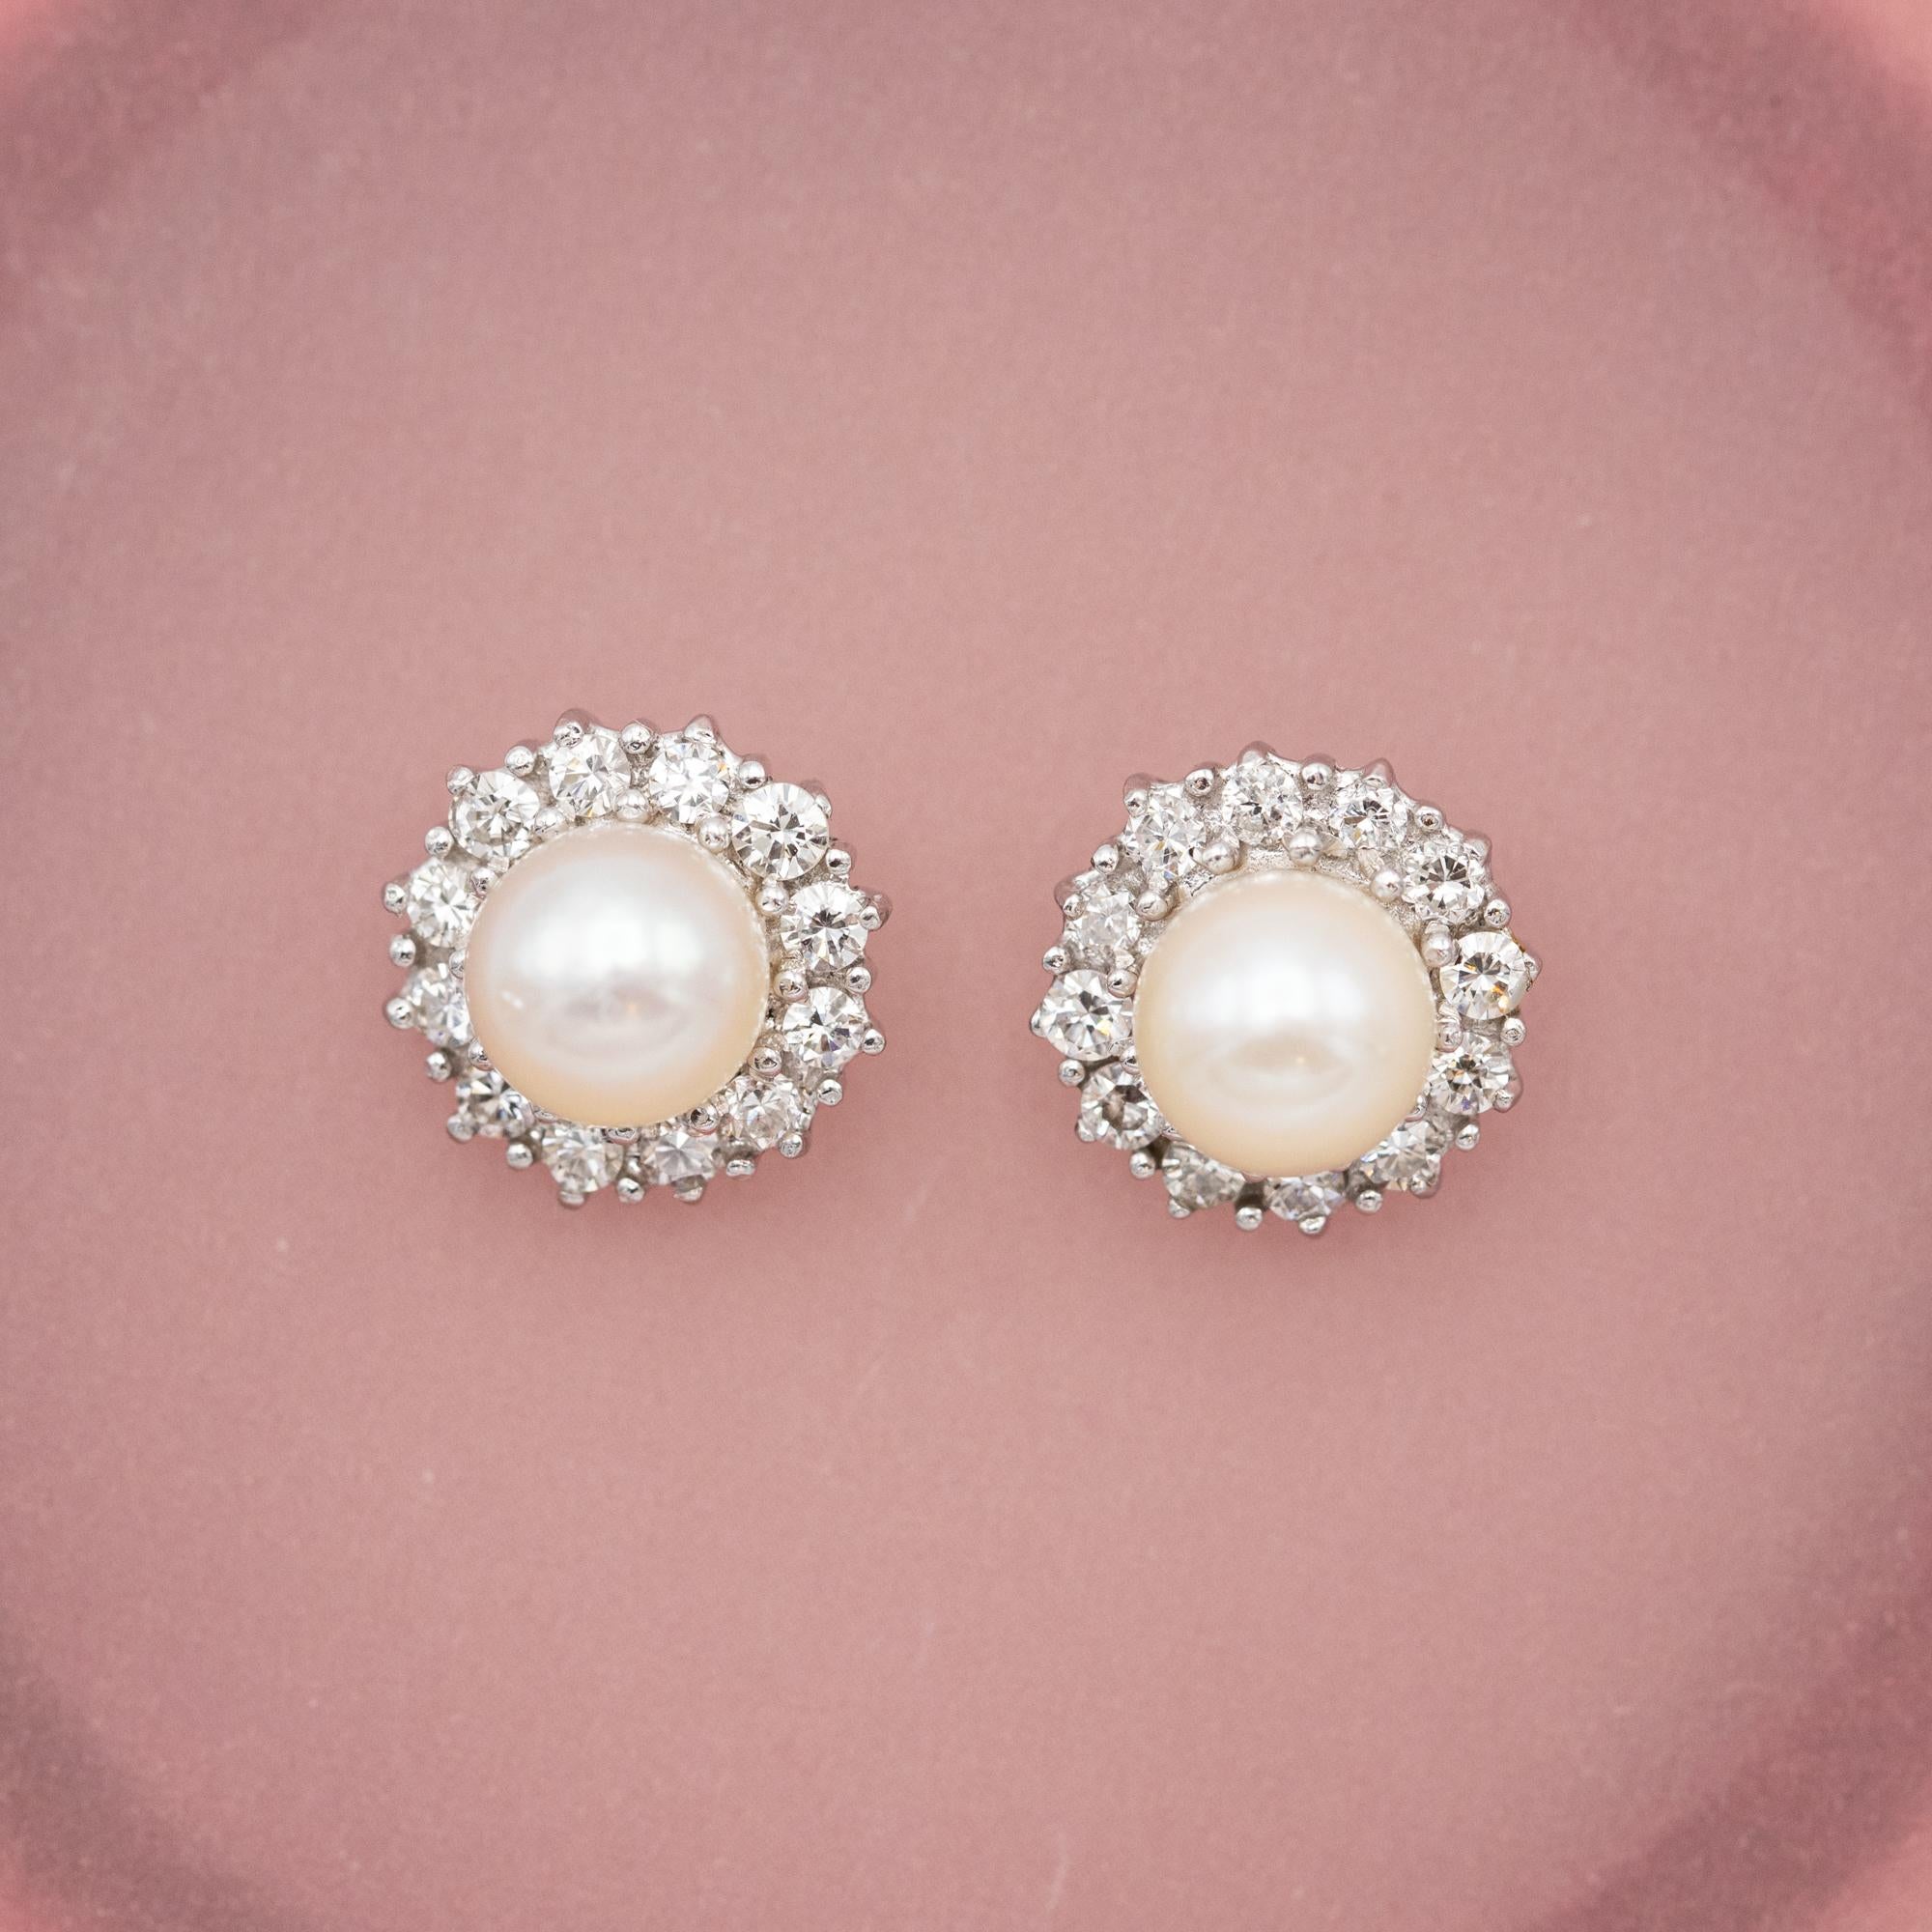 18K gold earrings - Small floral diamond and pearl cluster studs - 0.6 ct In Good Condition For Sale In Antwerp, BE